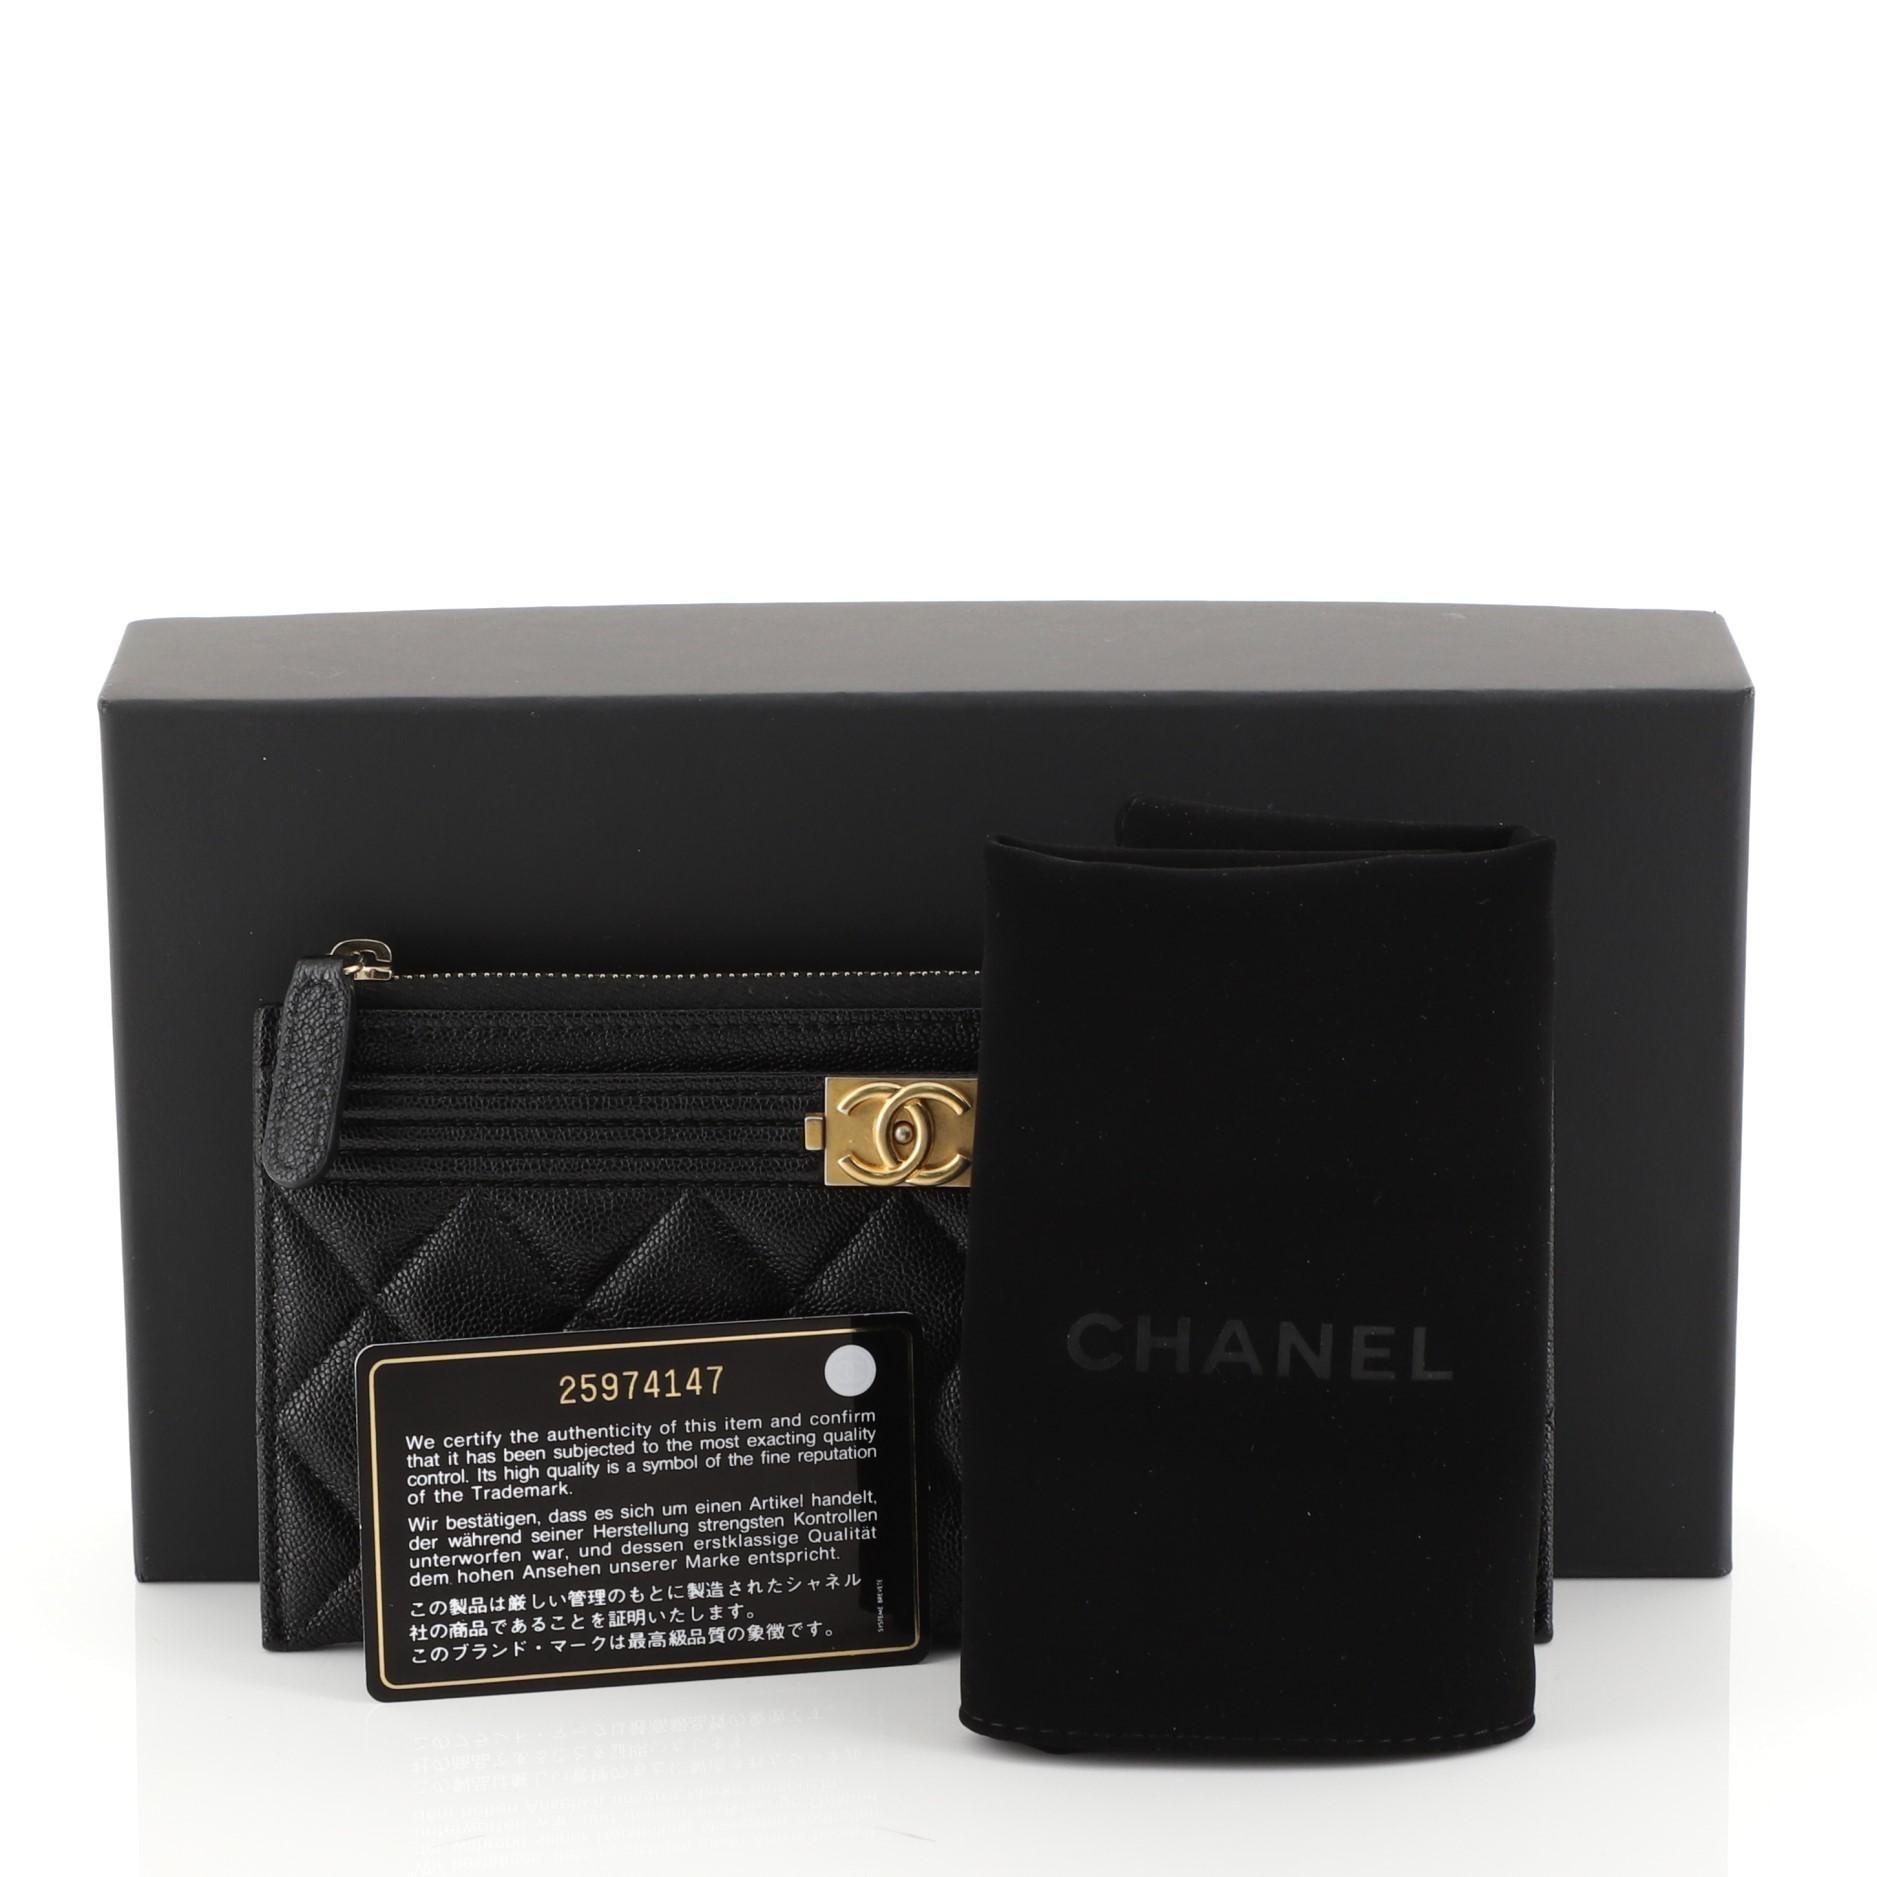 This Chanel Boy Zip Pouch Quilted Caviar Long, crafted from black quilted caviar leather, features CC boy logo and matte gold-tone hardware. Its zip closure opens to a black fabric interior. Hologram sticker reads: 25974147. 

Estimated Retail